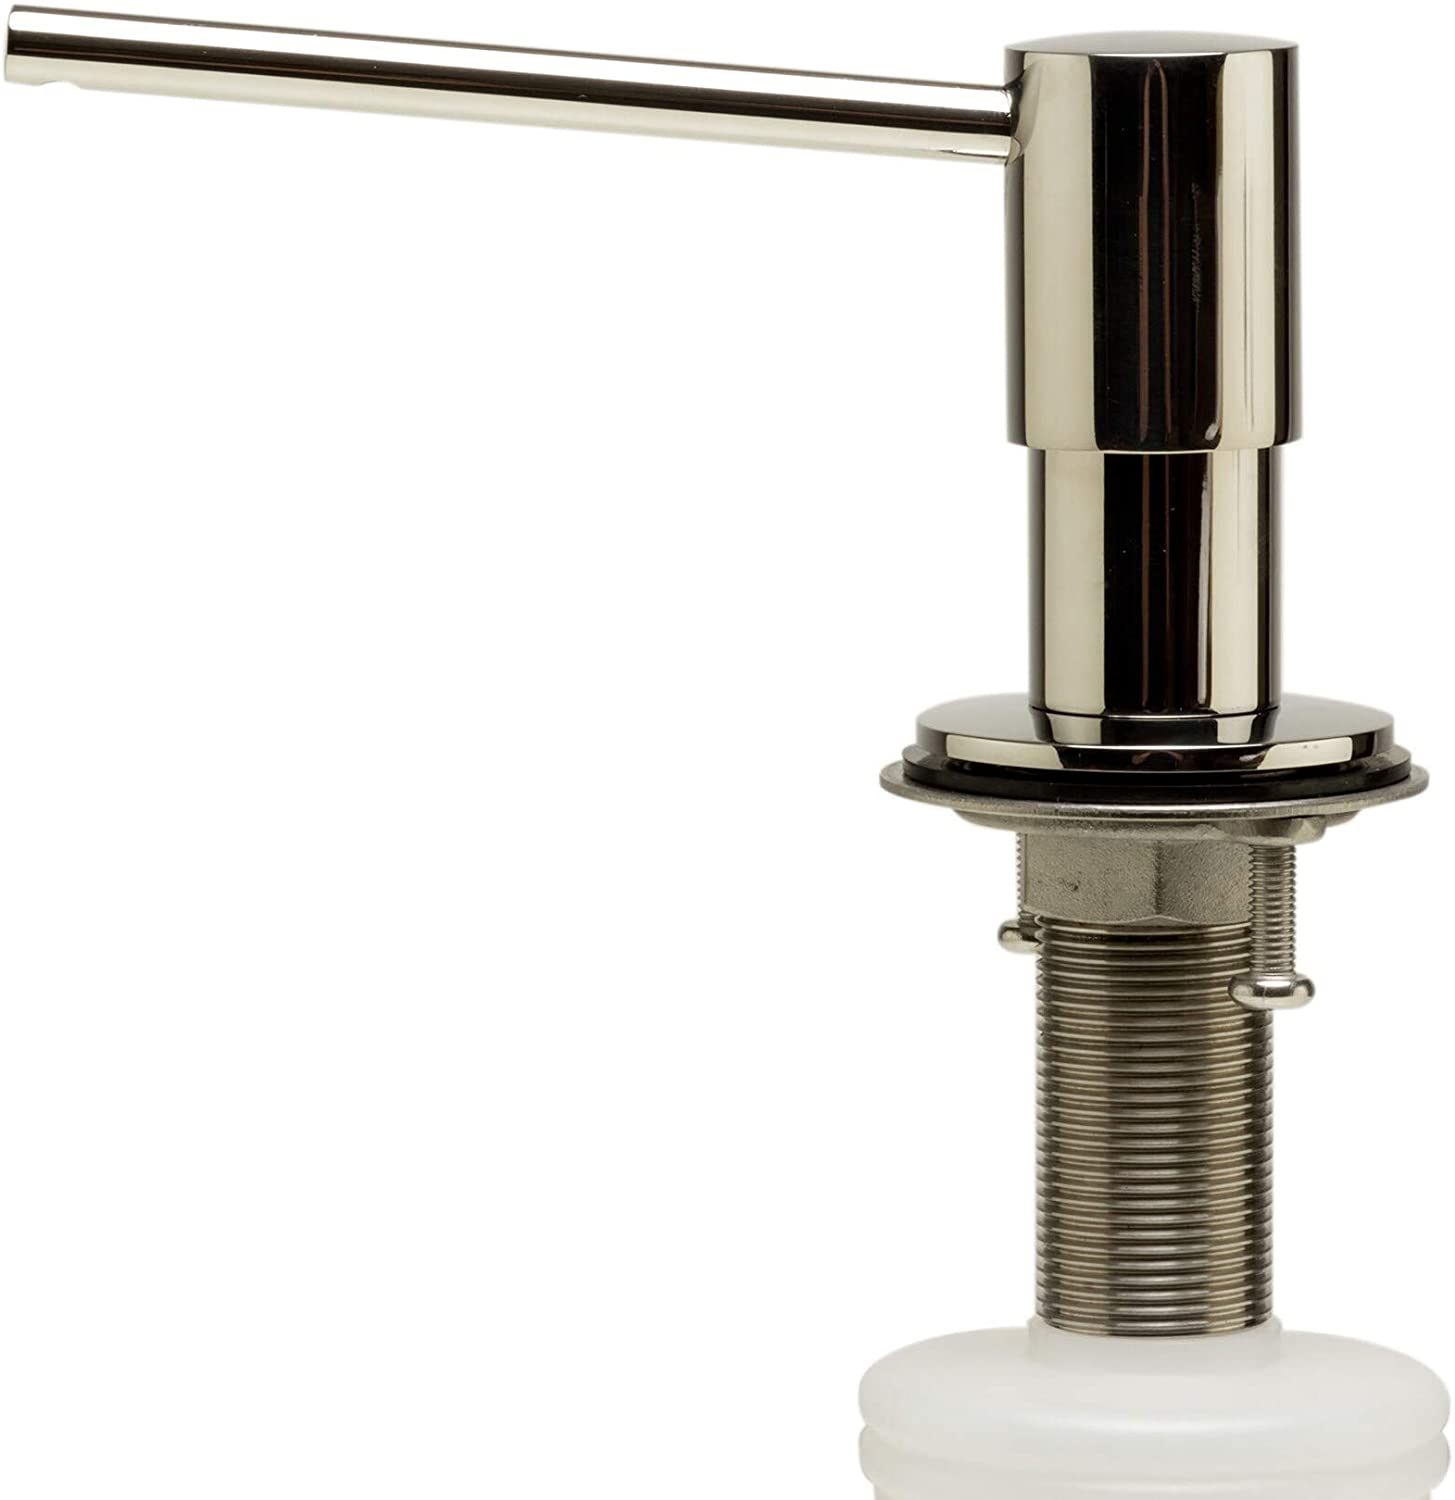 Modern Round Polished Stainless Steel Soap Dispenser